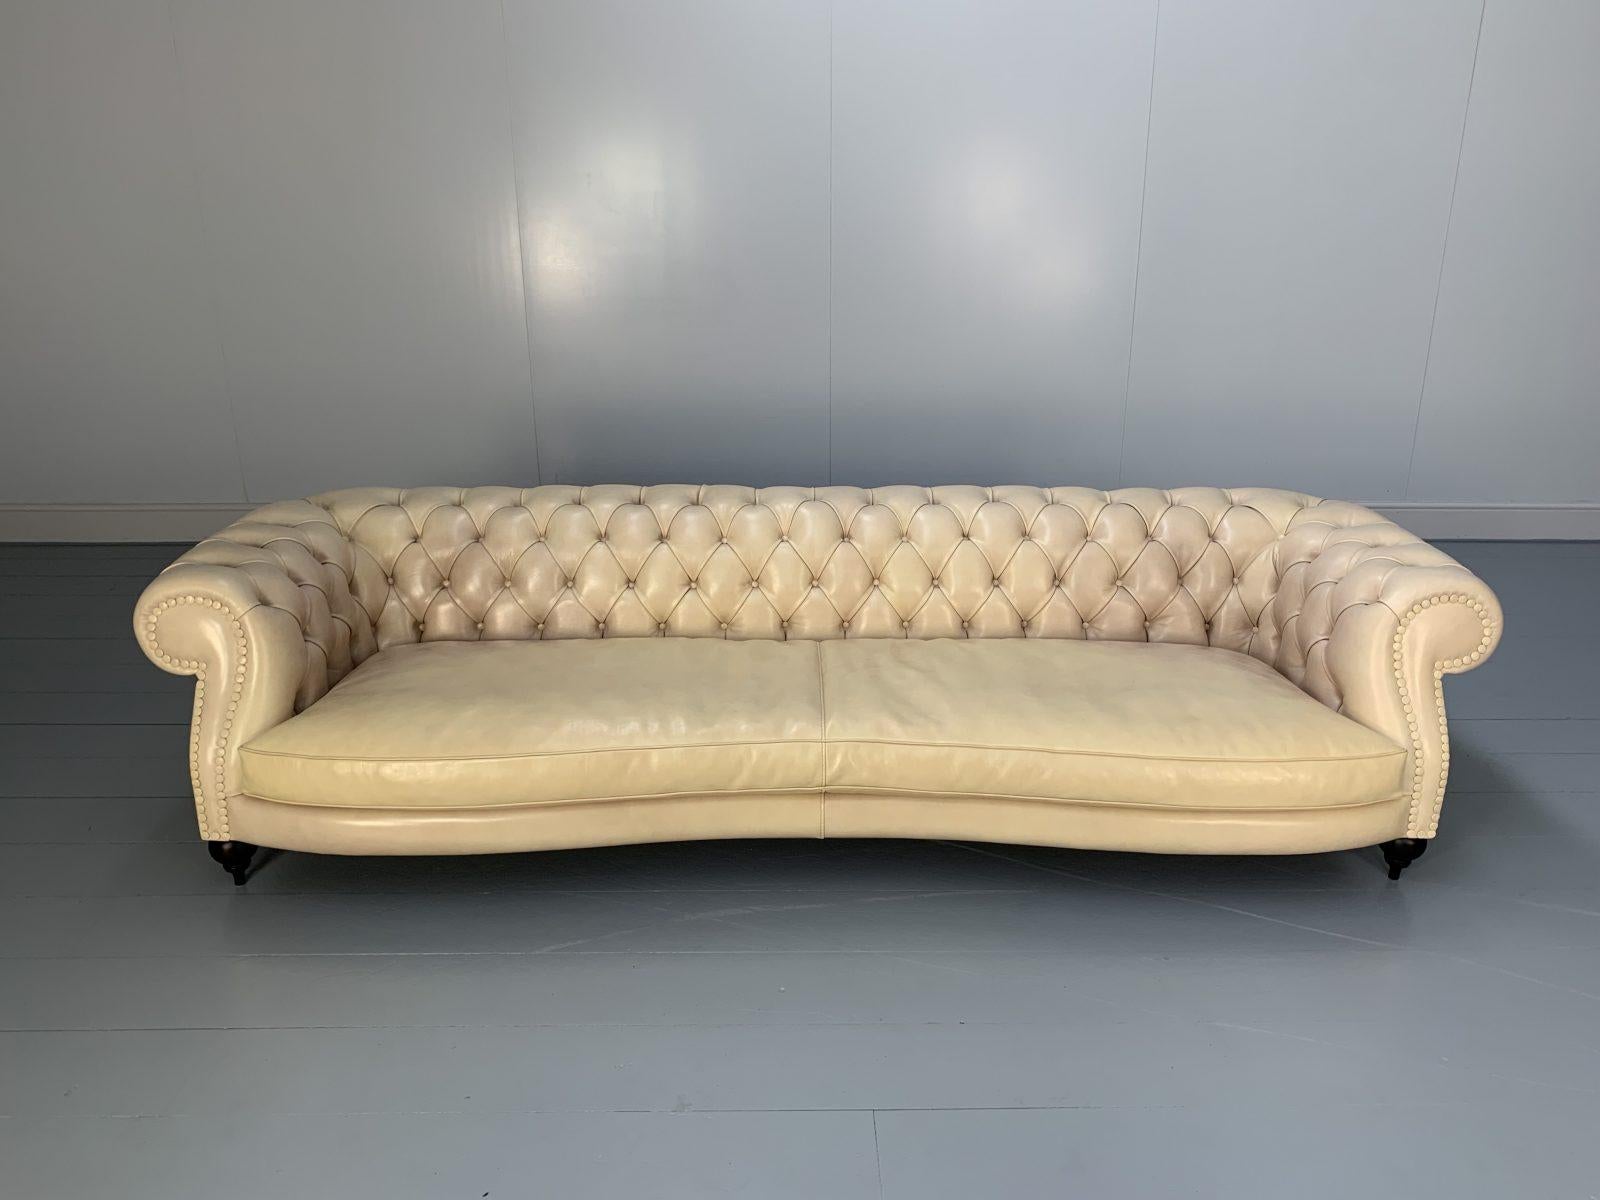 Baxter of Italy “Diana Chester” 4-Seat Sofa in Cream “Tuscany” Leather In Good Condition For Sale In Barrowford, GB